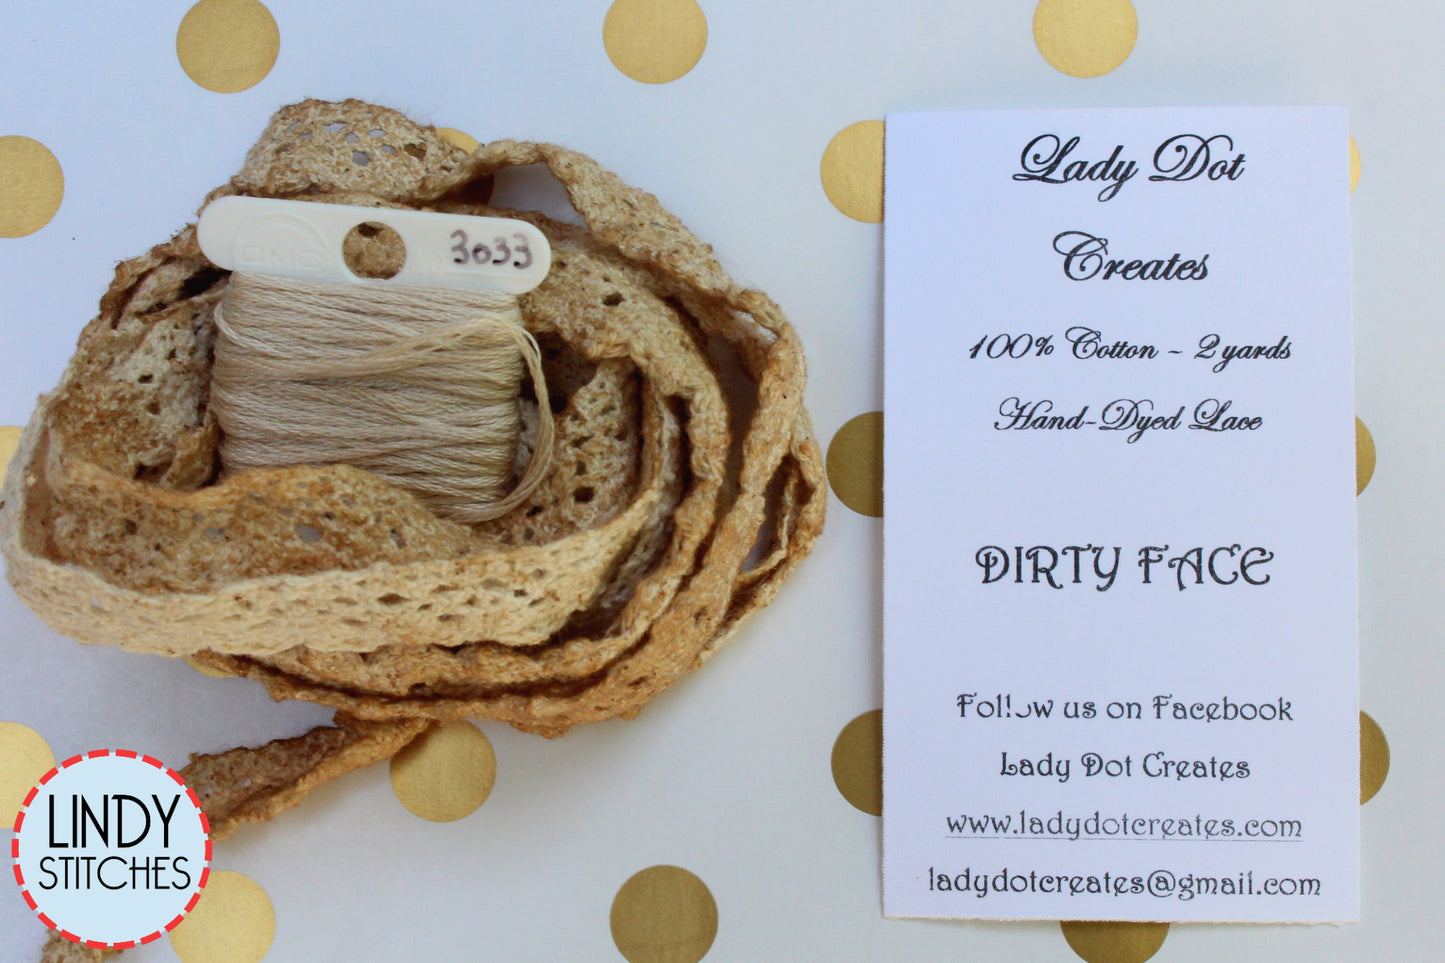 Dirty Face Lace Hand Dyed 100% Cotton Lace by Lady Dot Creates